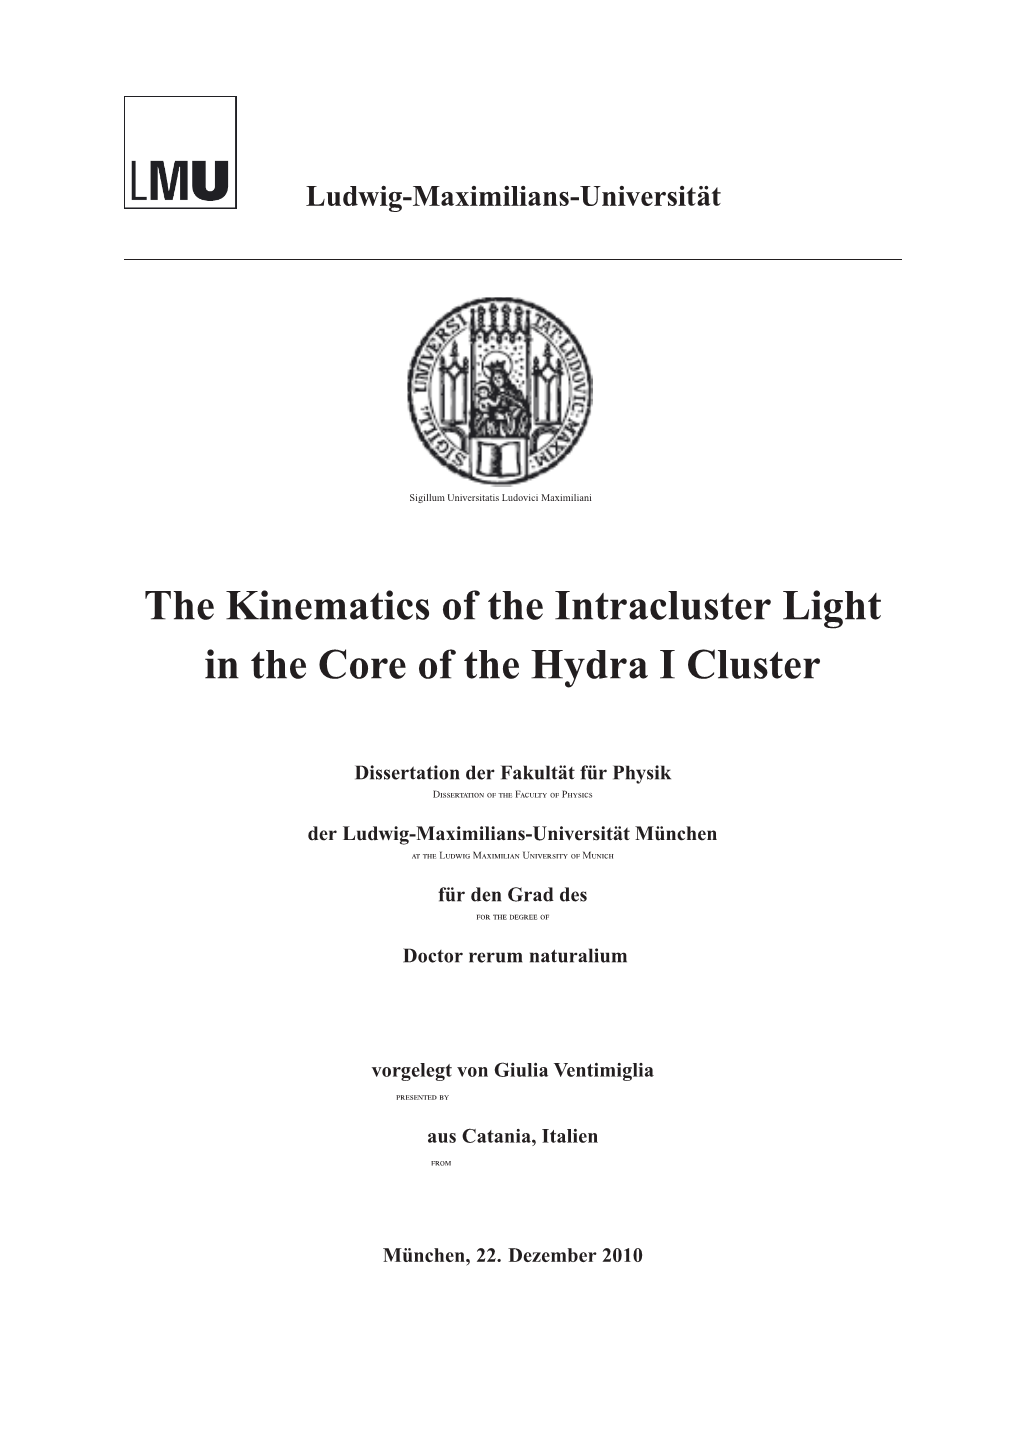 The Kinematics of the Intracluster Light in the Core of the Hydra I Cluster